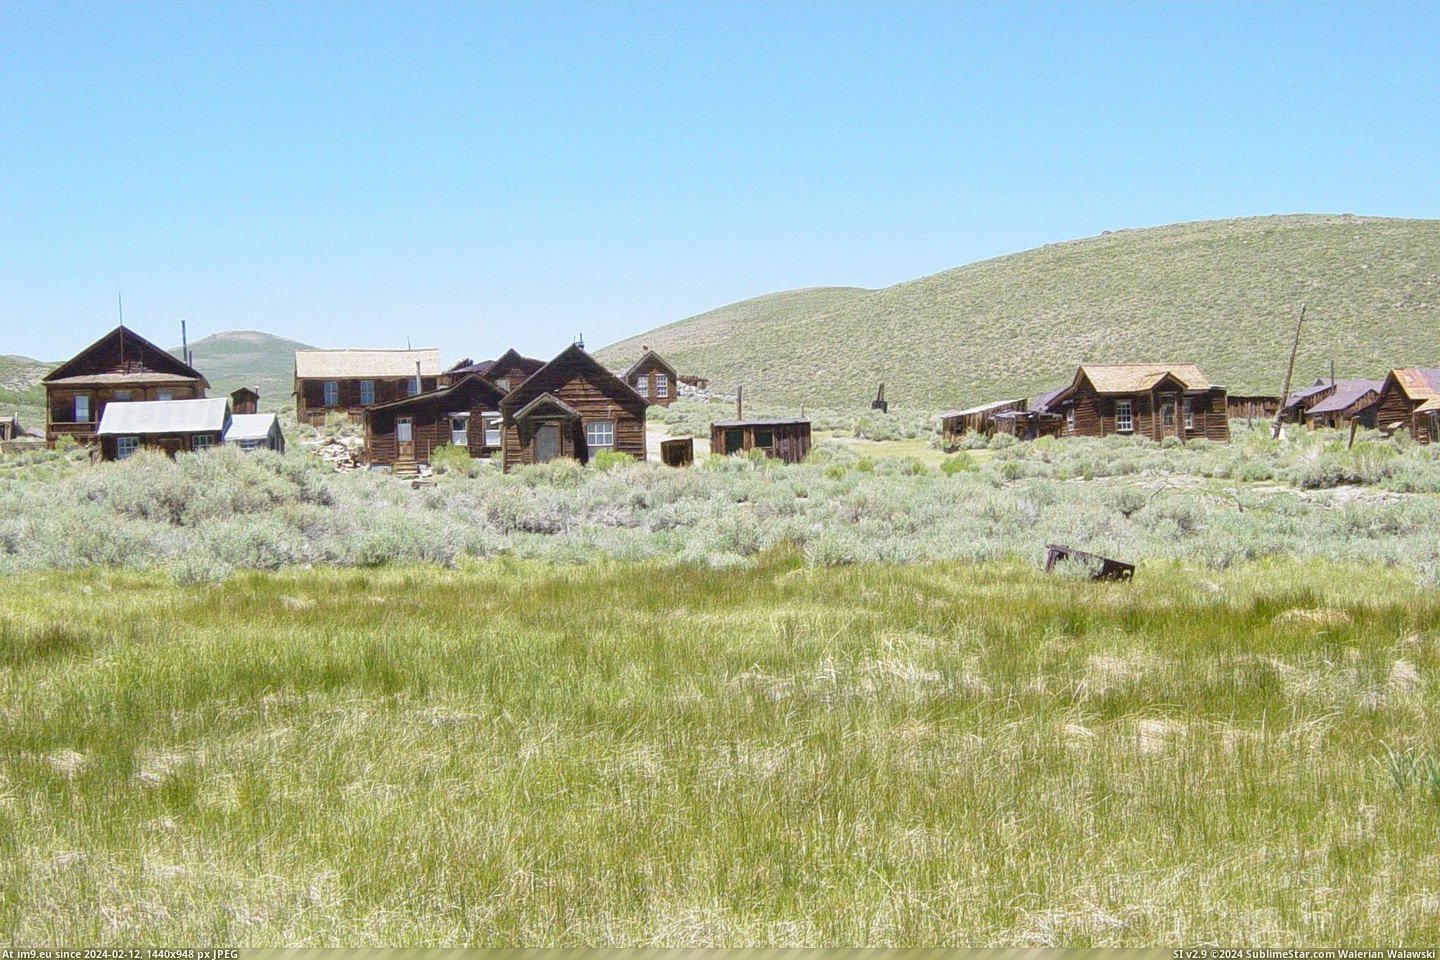 #California #Office #Assay #Sodderling #Site #Bodie Site Of Sodderling Assay Office In Bodie, California Pic. (Image of album Bodie - a ghost town in Eastern California))